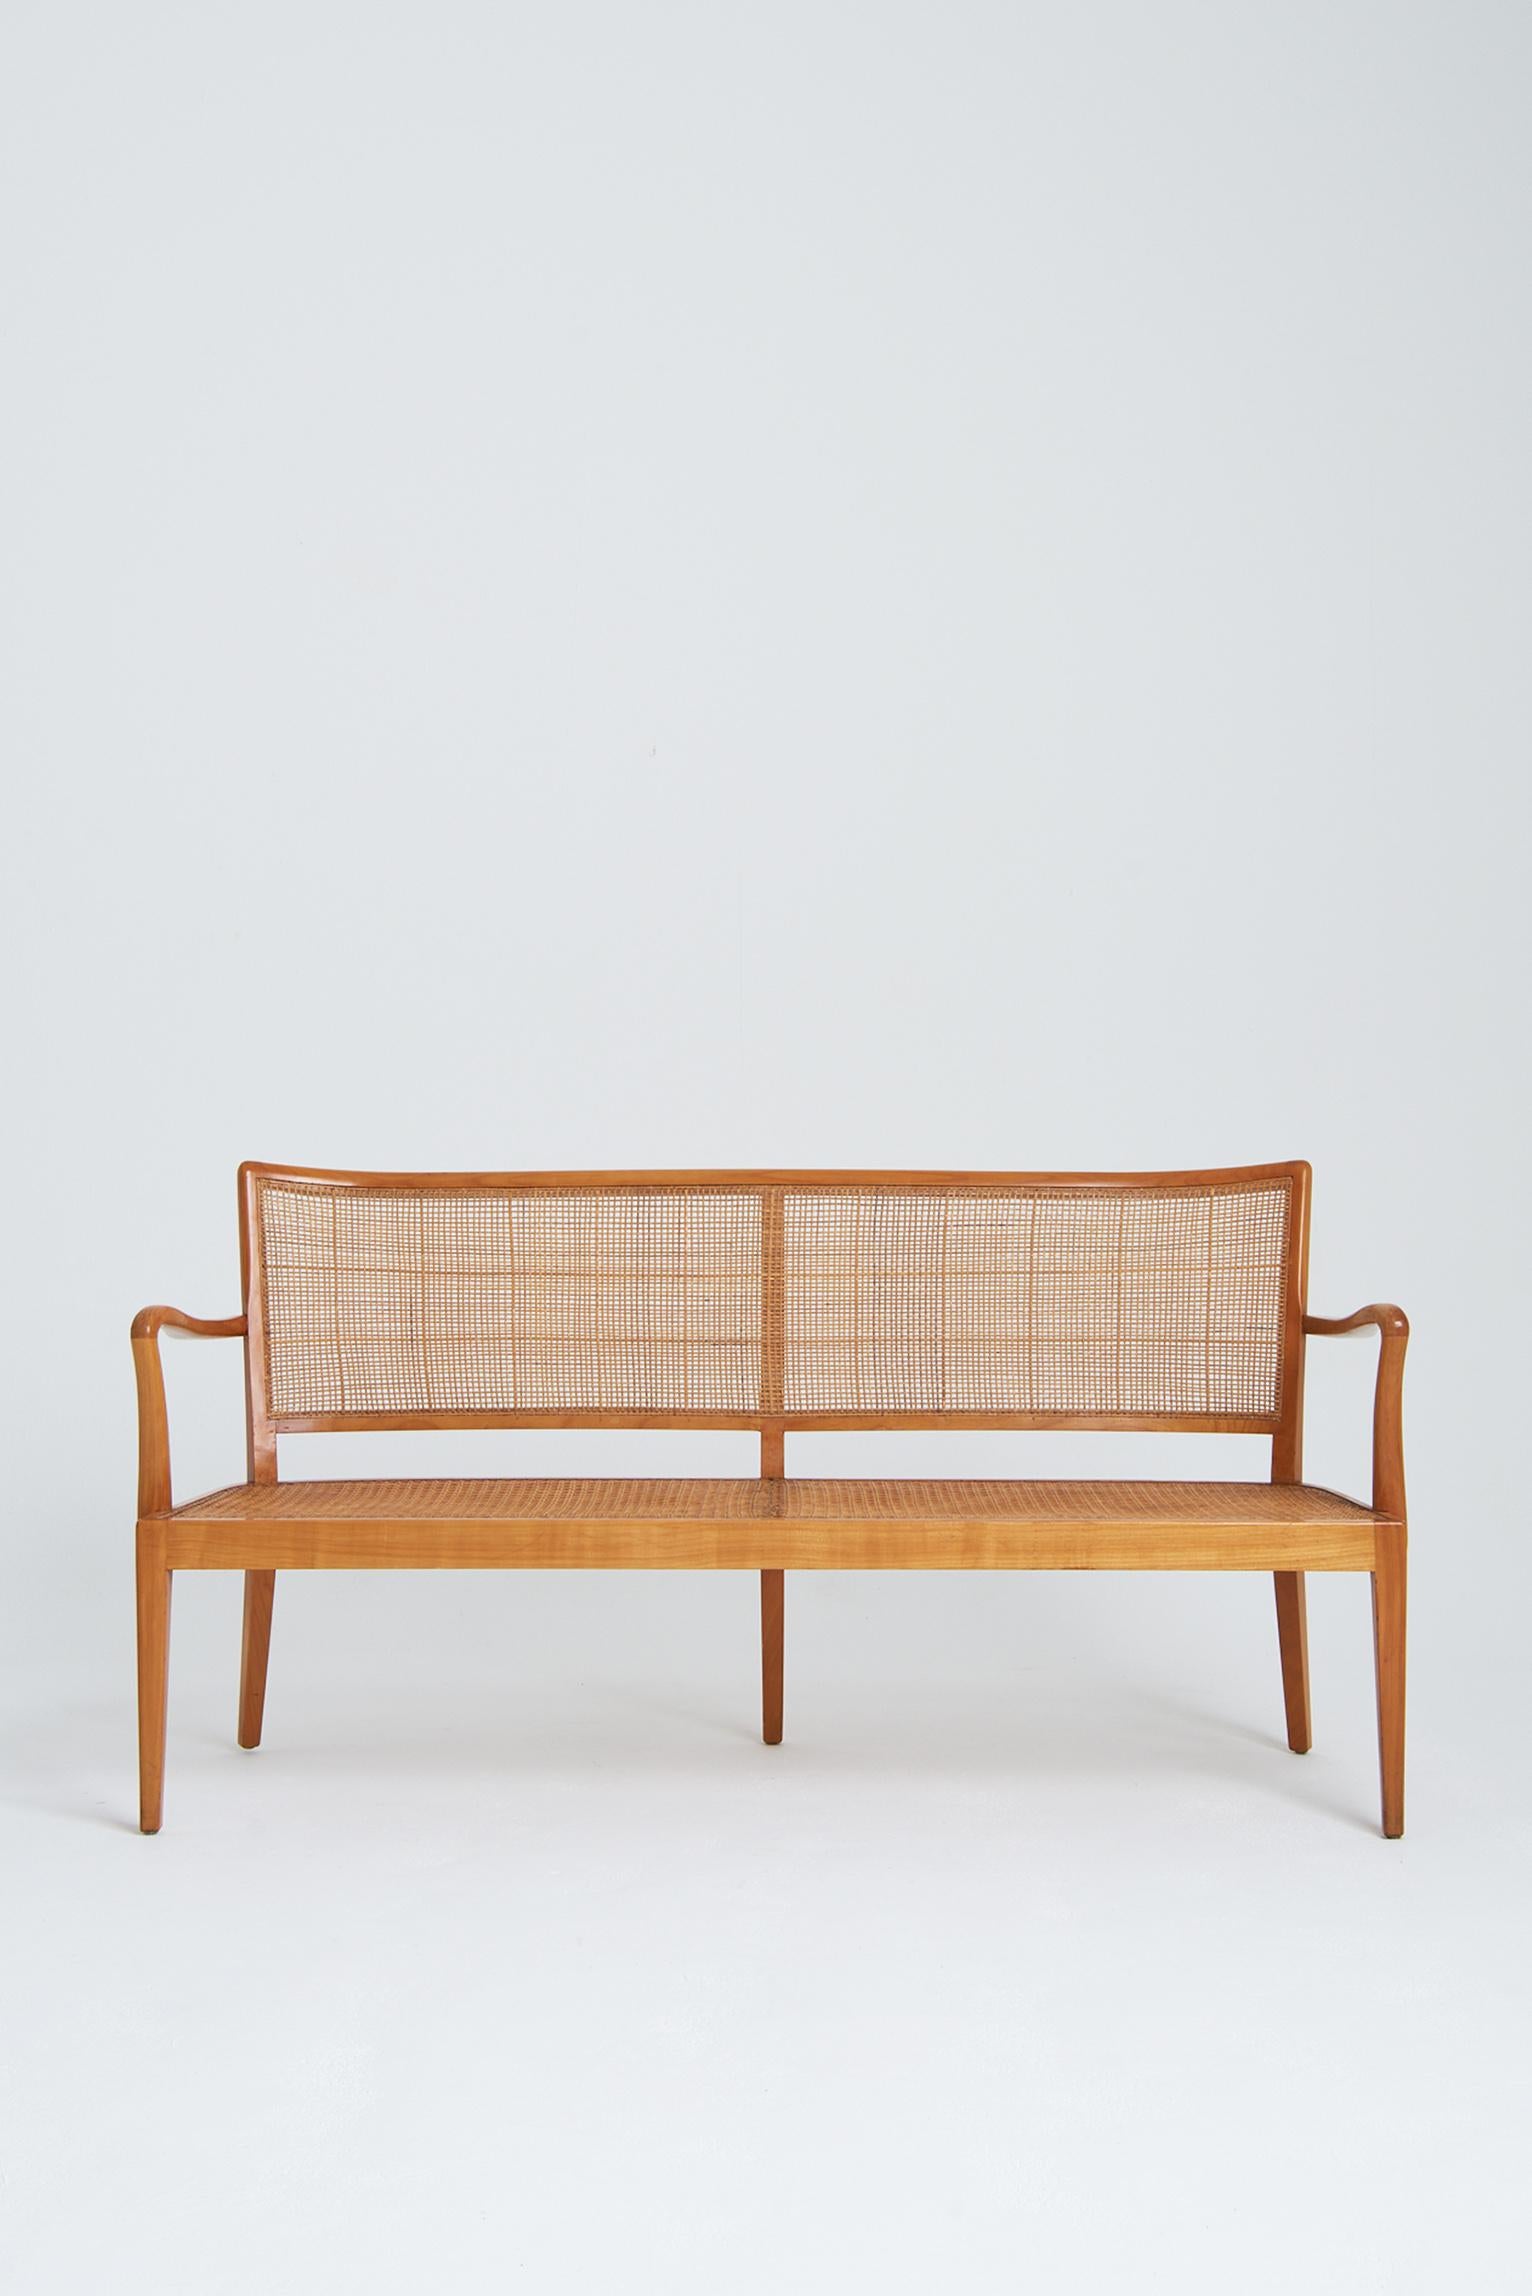 A cherry wood and cane settee by Rudolf Frank (1898–1974).
Germany, circa 1955.
  